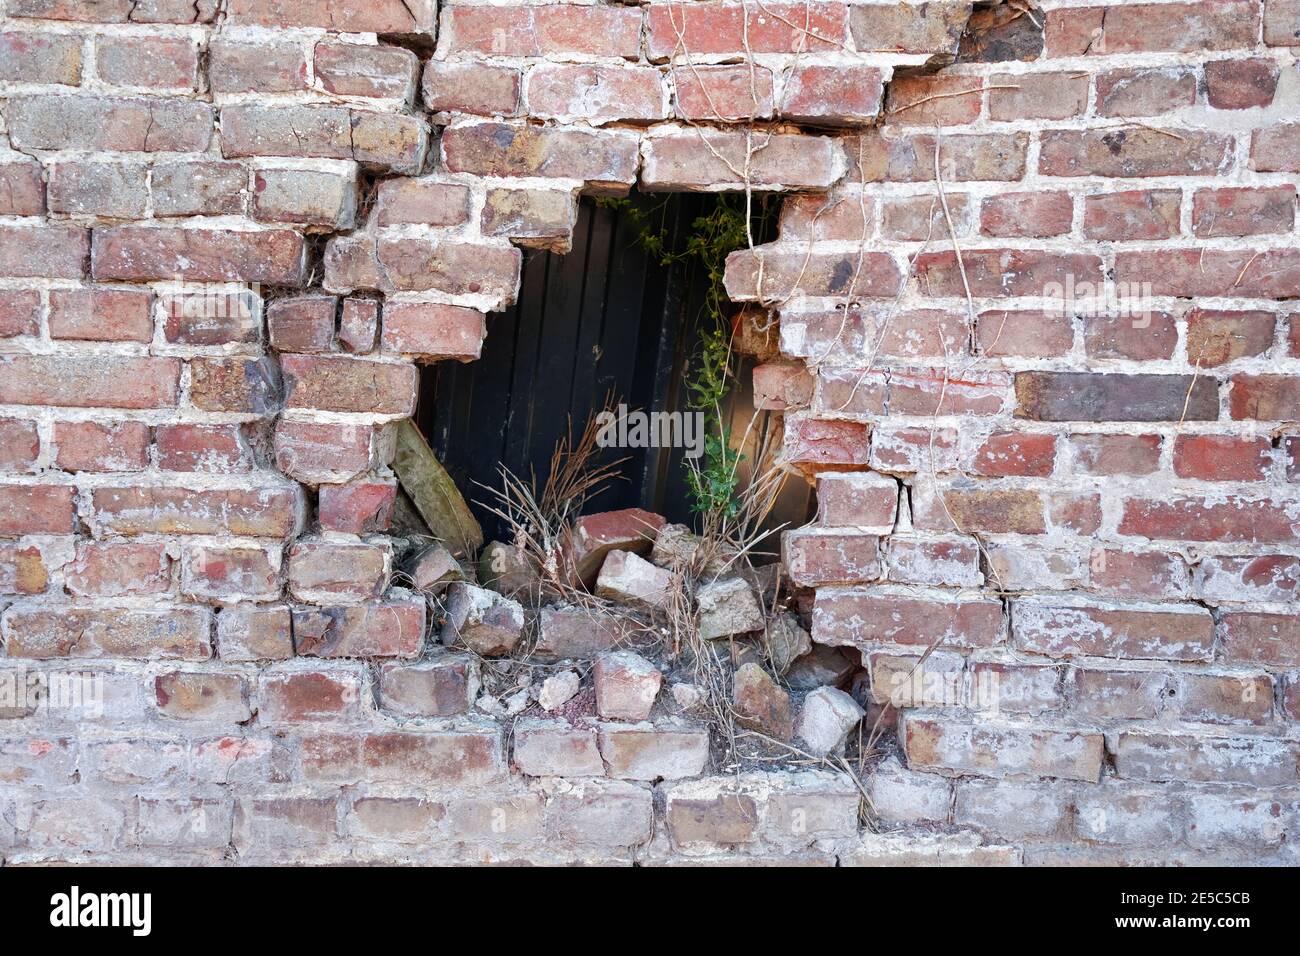 Photograph of a broken porous old ruined brick wall Brick wall with hole after accident, many cracks, collapse hazard, dark background, horizontal Stock Photo